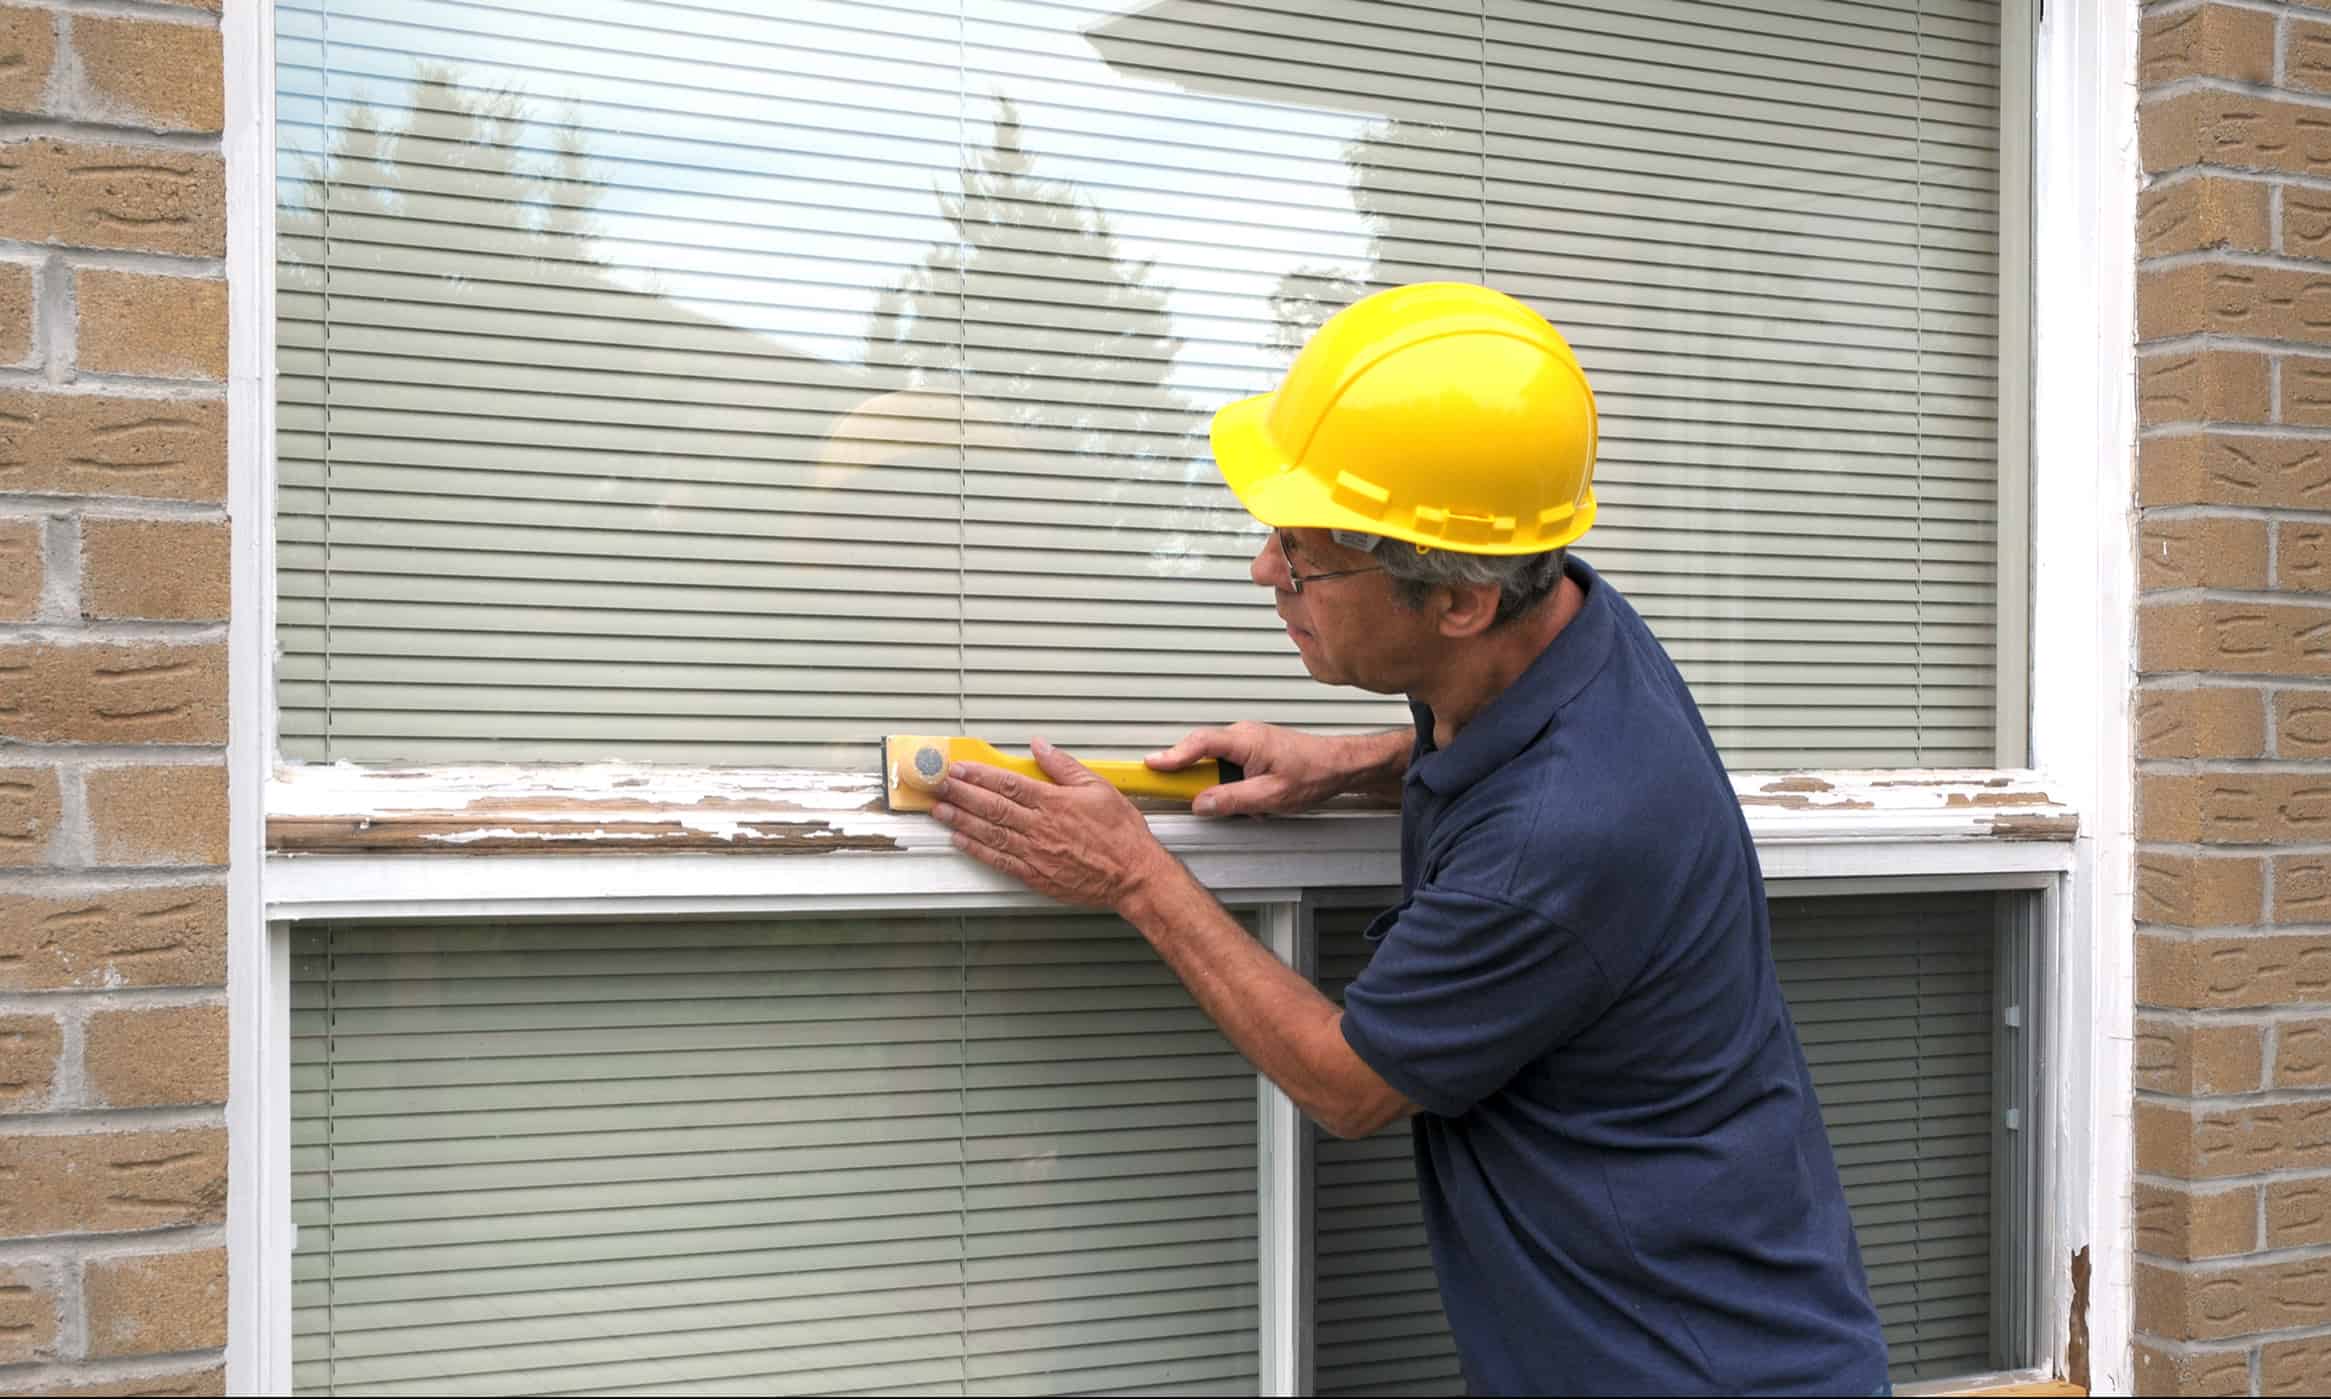 How to Remove Paint From Window In 30 Minutes